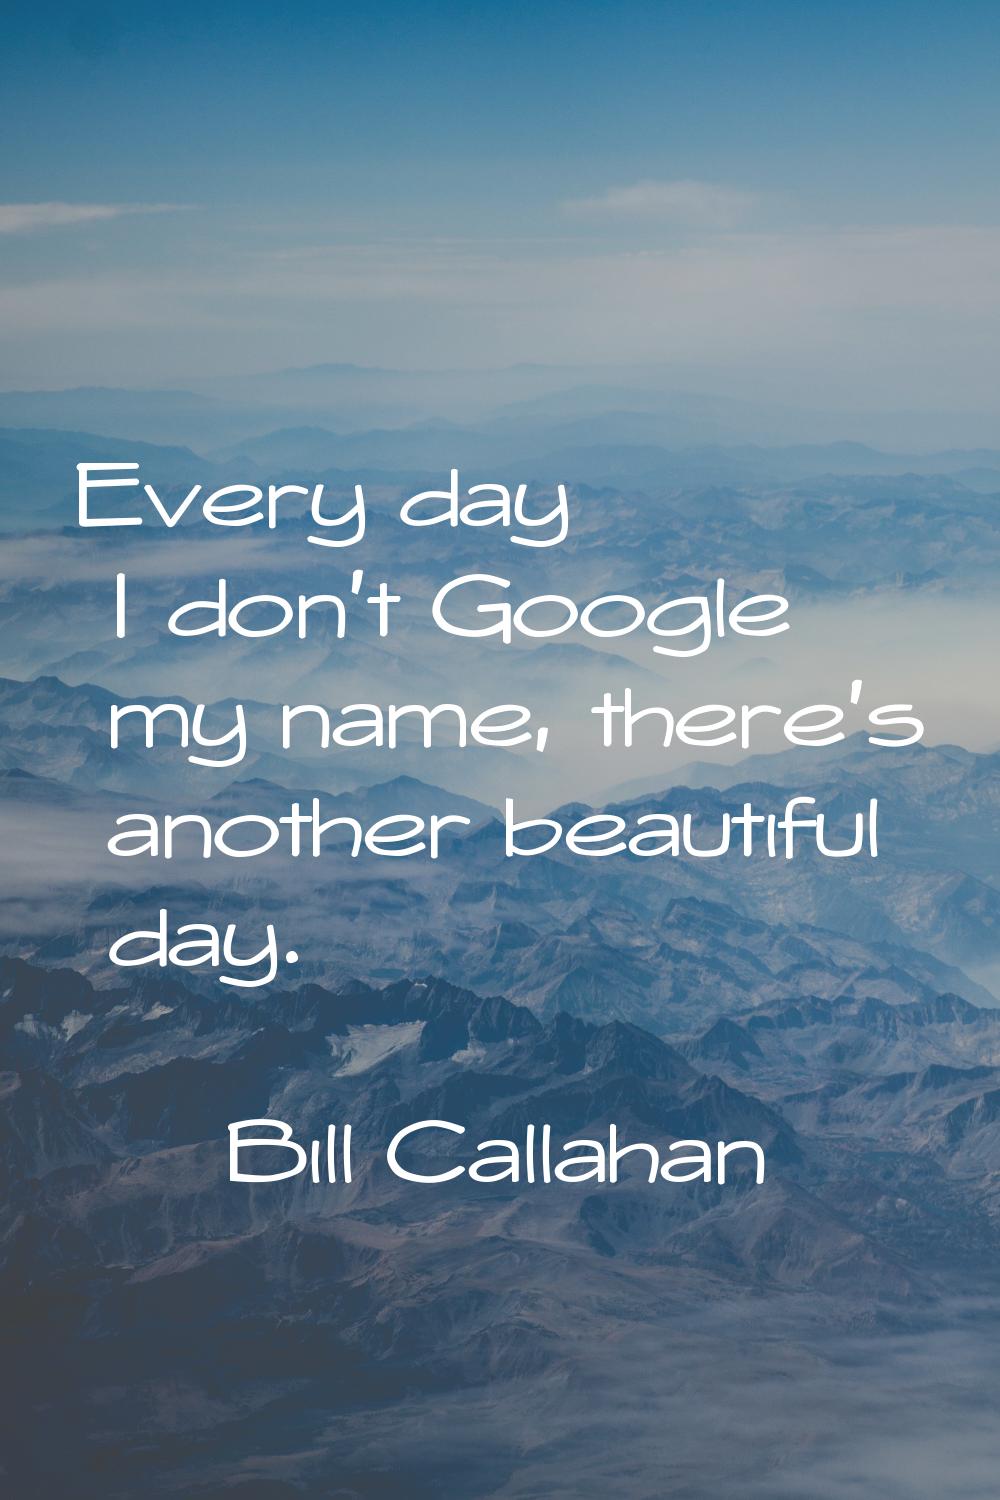 Every day I don't Google my name, there's another beautiful day.